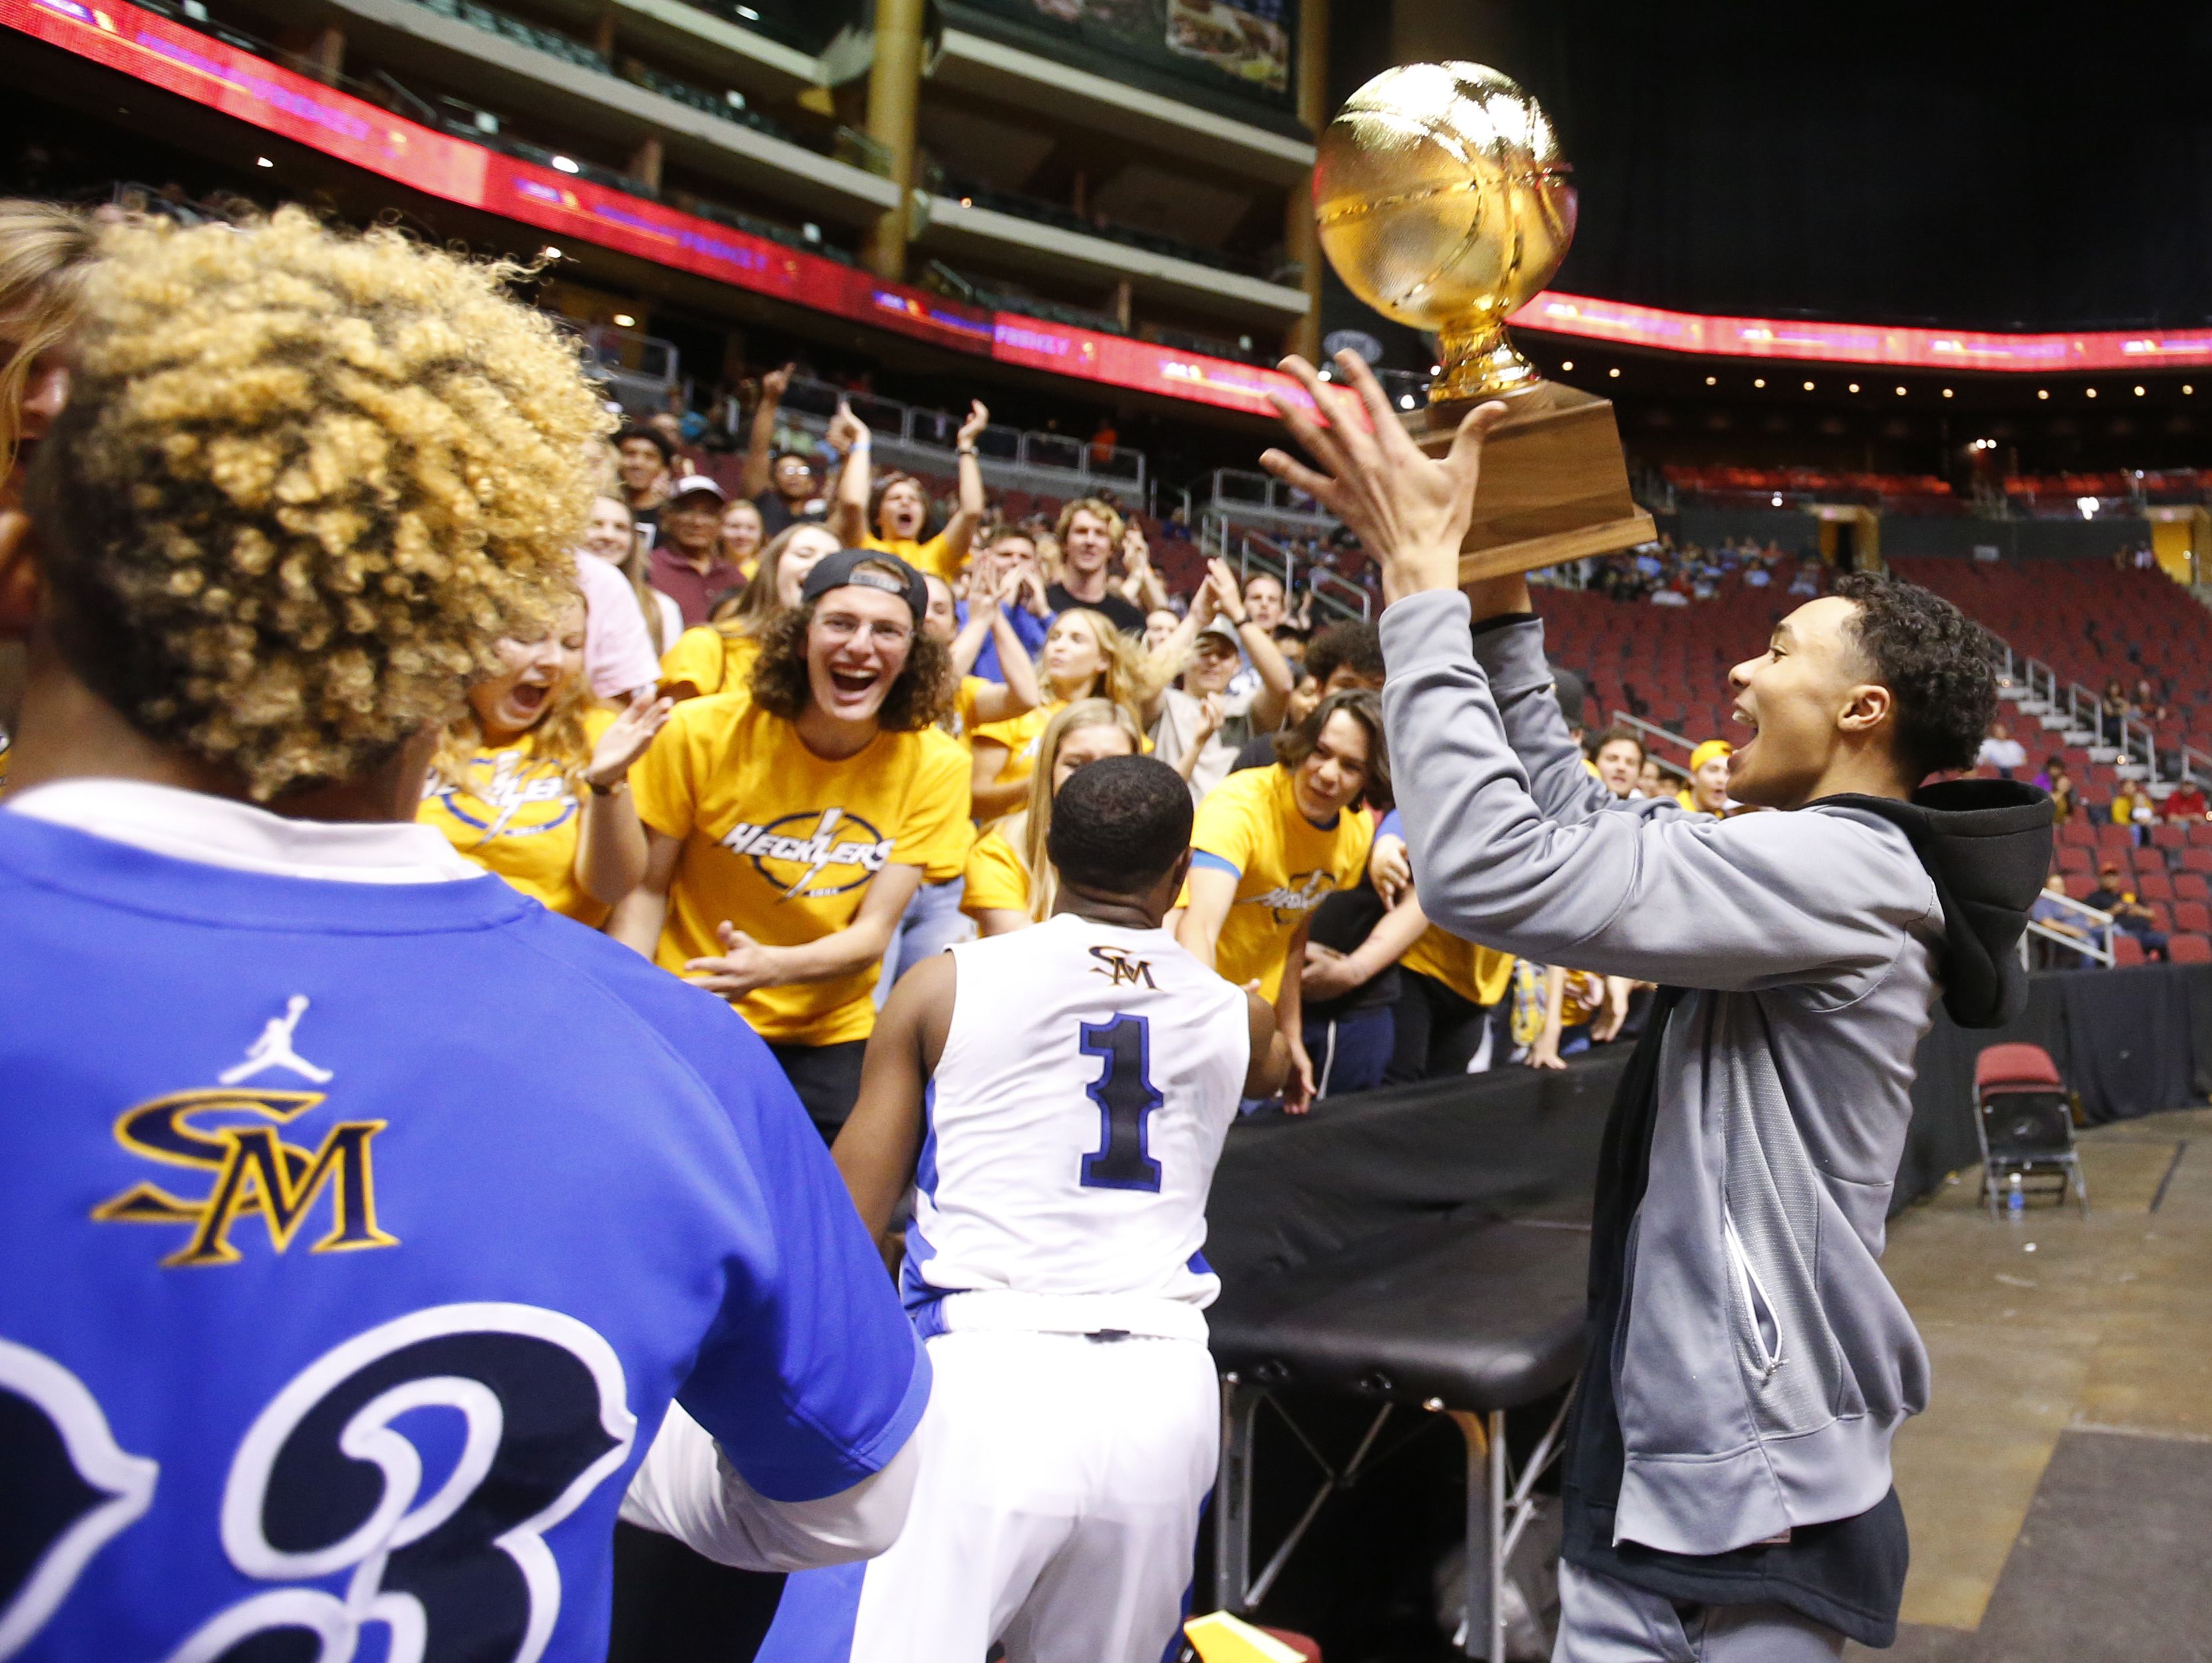 Shadow Mountain Jaelen House (2) celebrated winning the high school boys basketball: 4A Conference state championship game Salpointe at Gila River Arena in Glendale on February 25, 2017. House was ejected from the game during a skirmish with Salpointe Isaac Cruz (3)and was not allowed on the court to celebrate with his team.